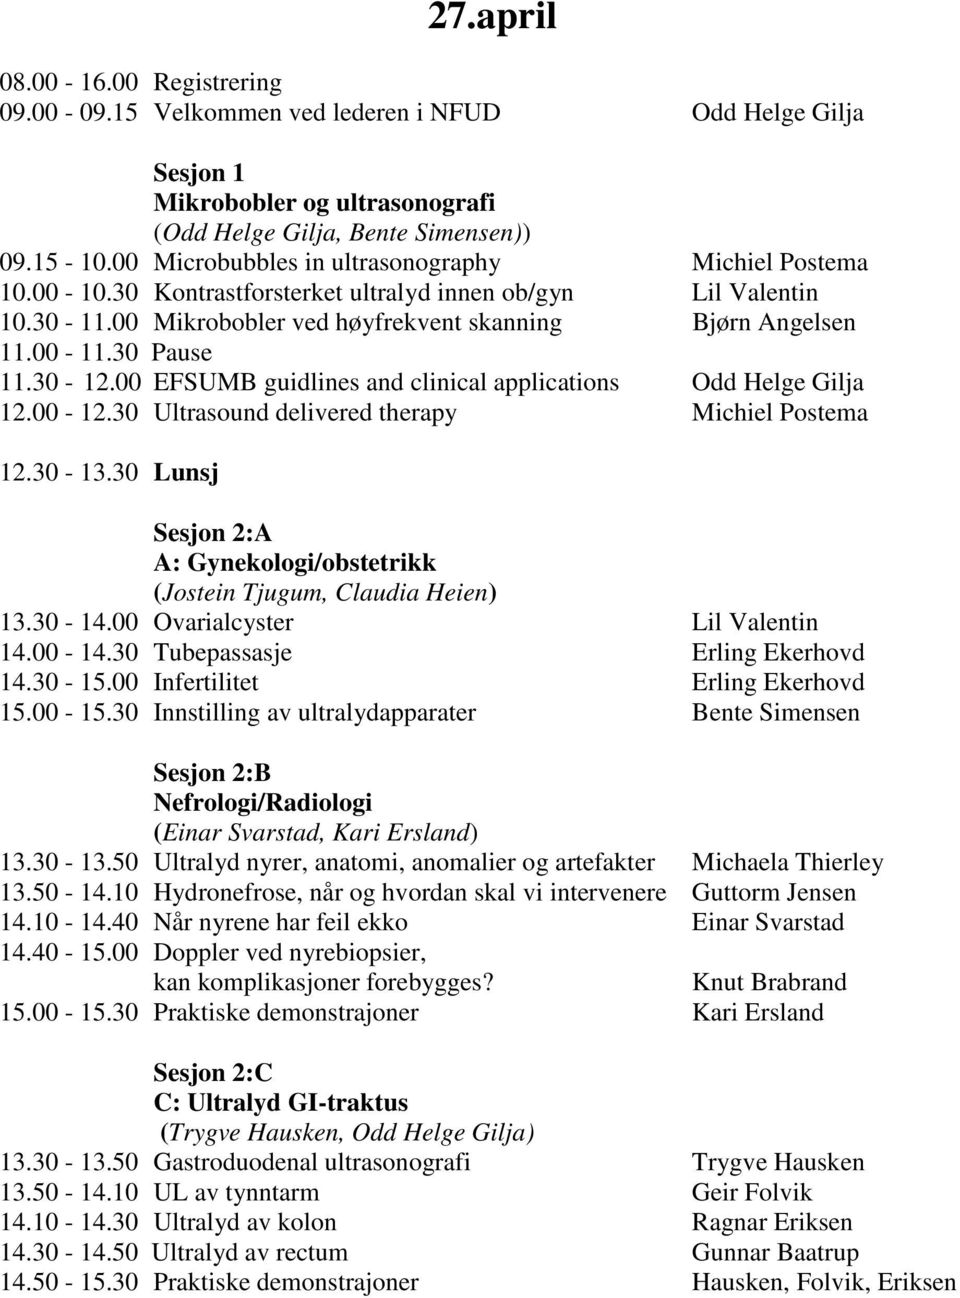 30 Pause 11.30-12.00 EFSUMB guidlines and clinical applications Odd Helge Gilja 12.00-12.30 Ultrasound delivered therapy Michiel Postema 12.30-13.